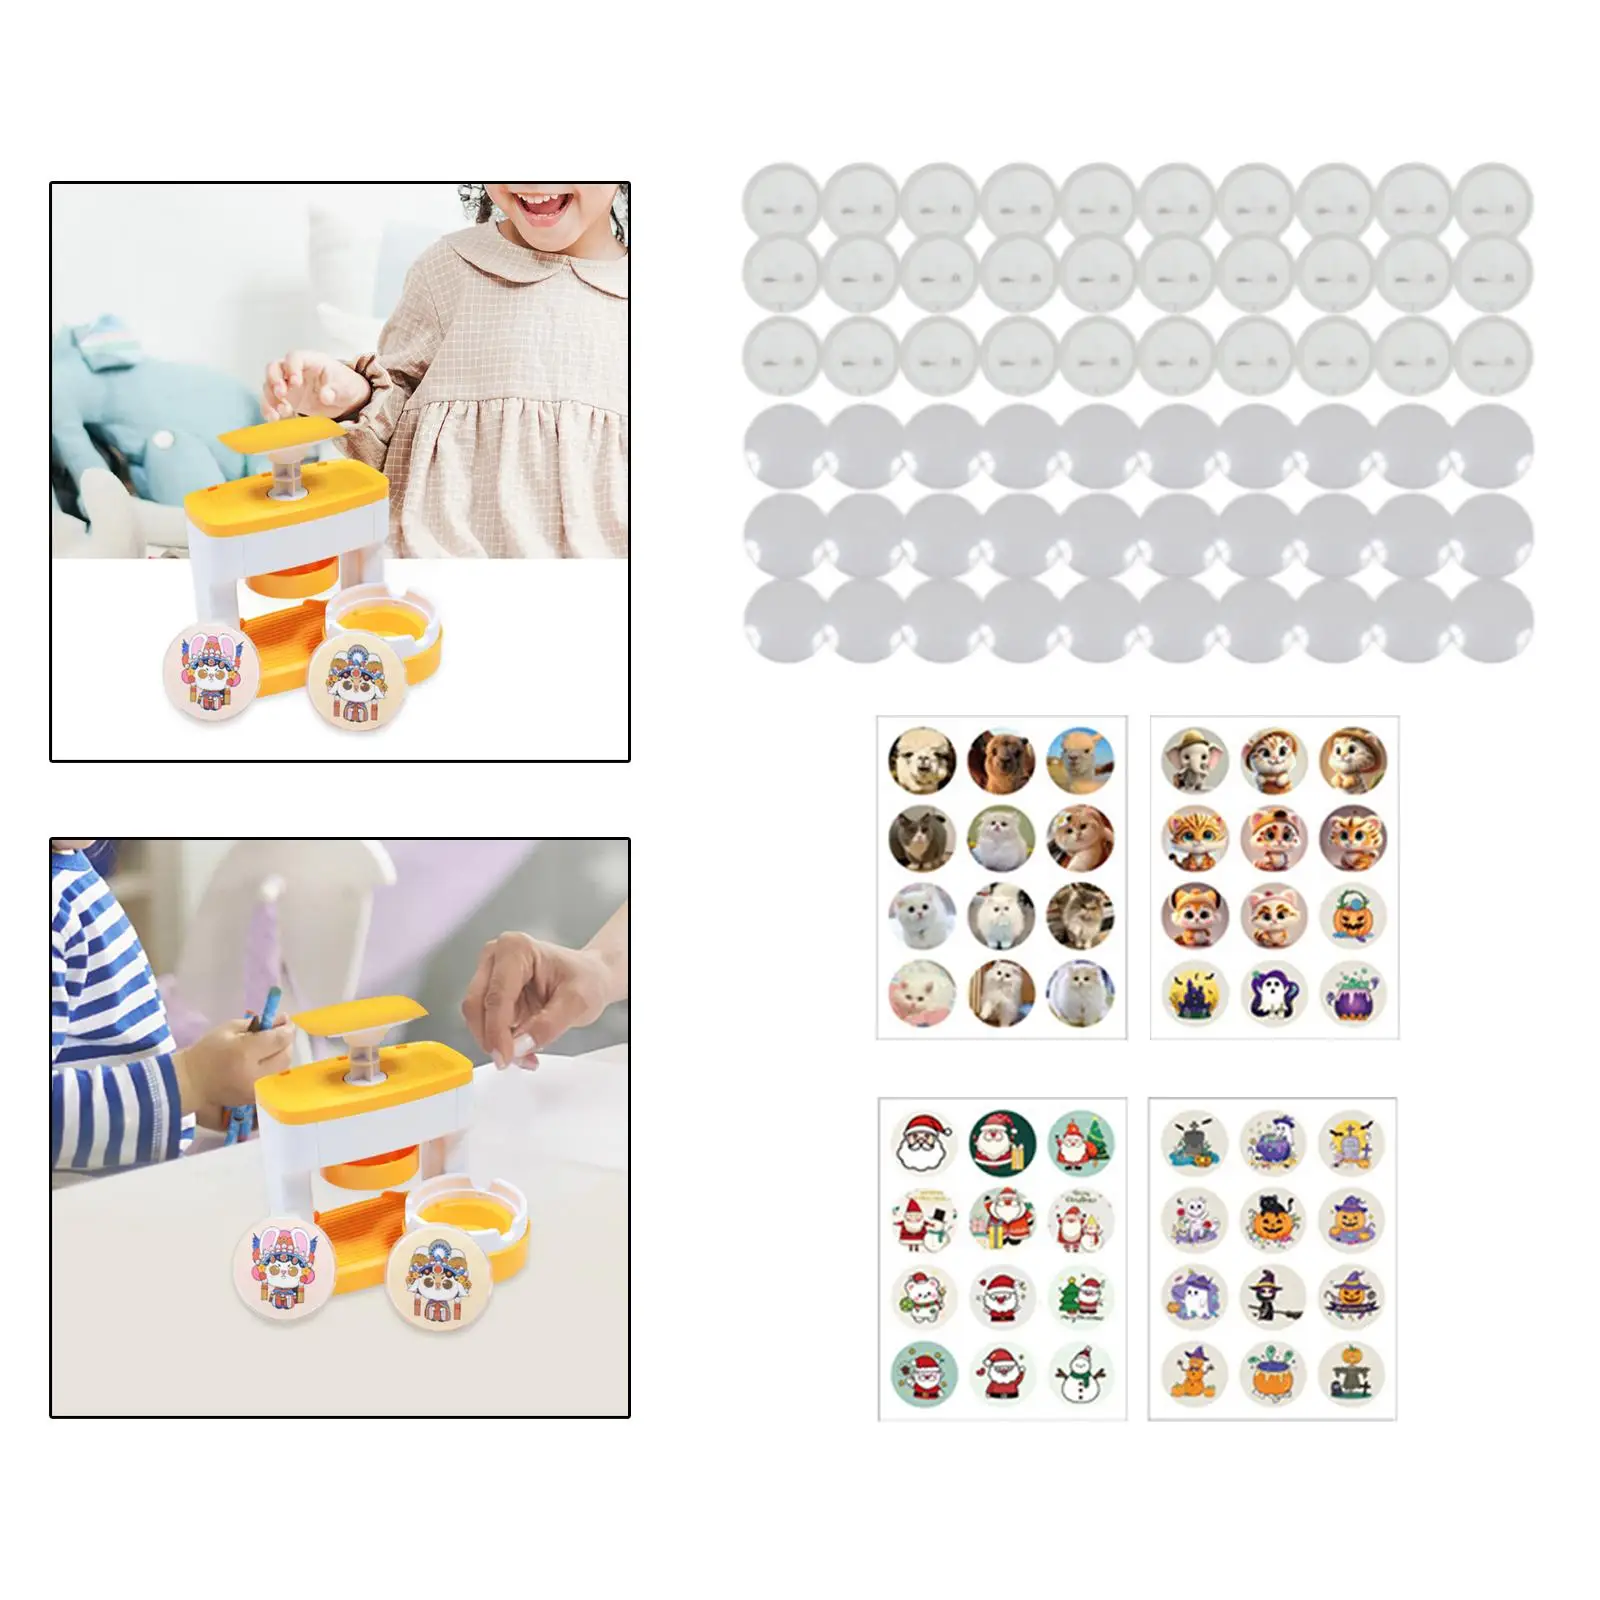 Button Badge Machine DIY Badges Set Upgrade Interchangeable Durable Round Shape Multiple Crafts for Girls Children Learning Toy